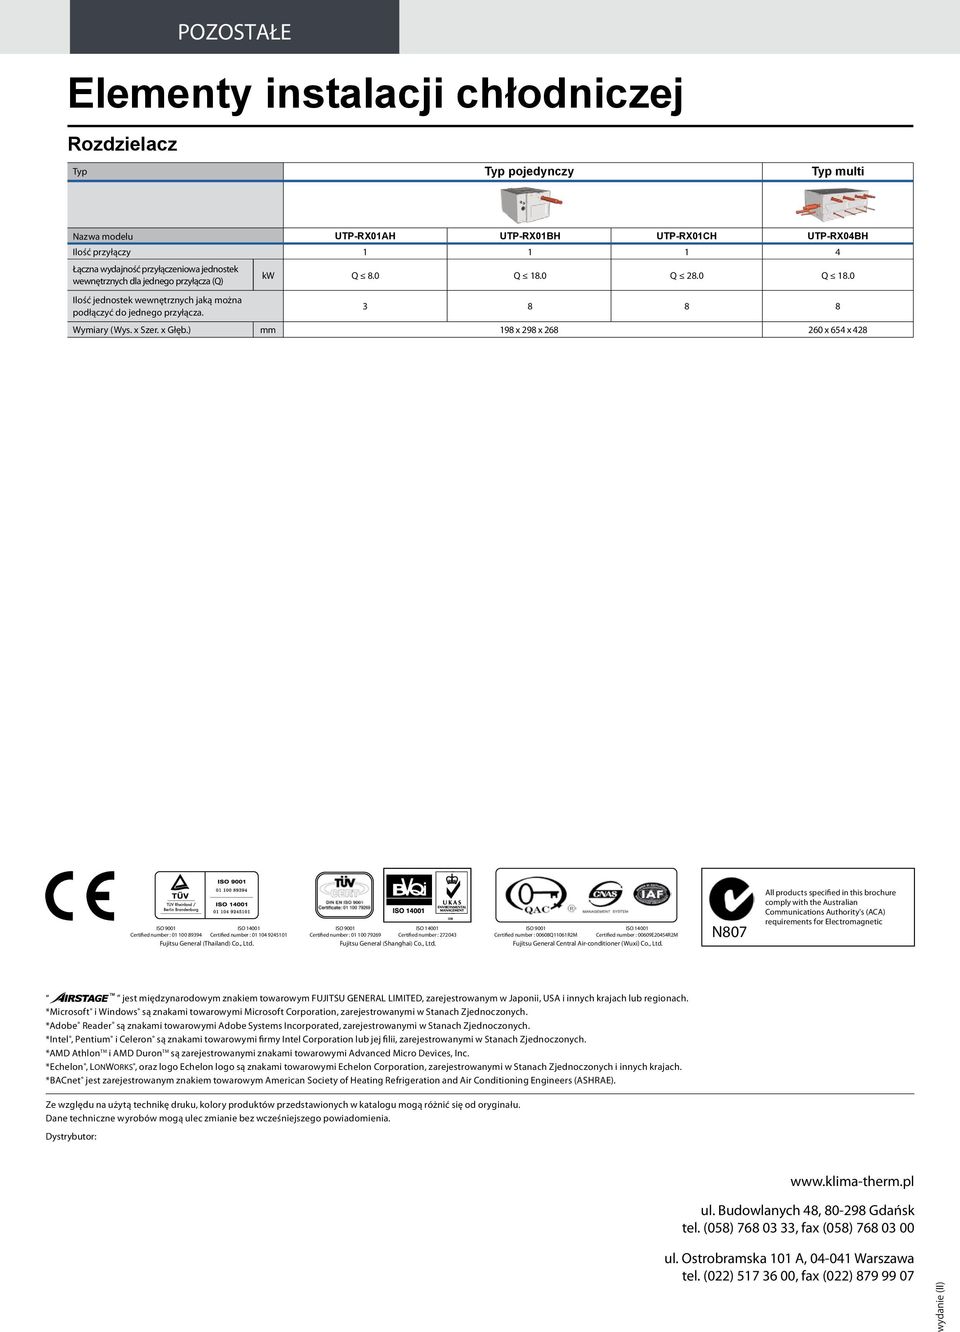 ) mm 198 x 298 x 268 260 x 654 x 428 ISO 9001 ISO 14001 Certified number : 01 100 89394 Certified number : 01 104 9245101 Fujitsu General (Thailand) Co., Ltd.